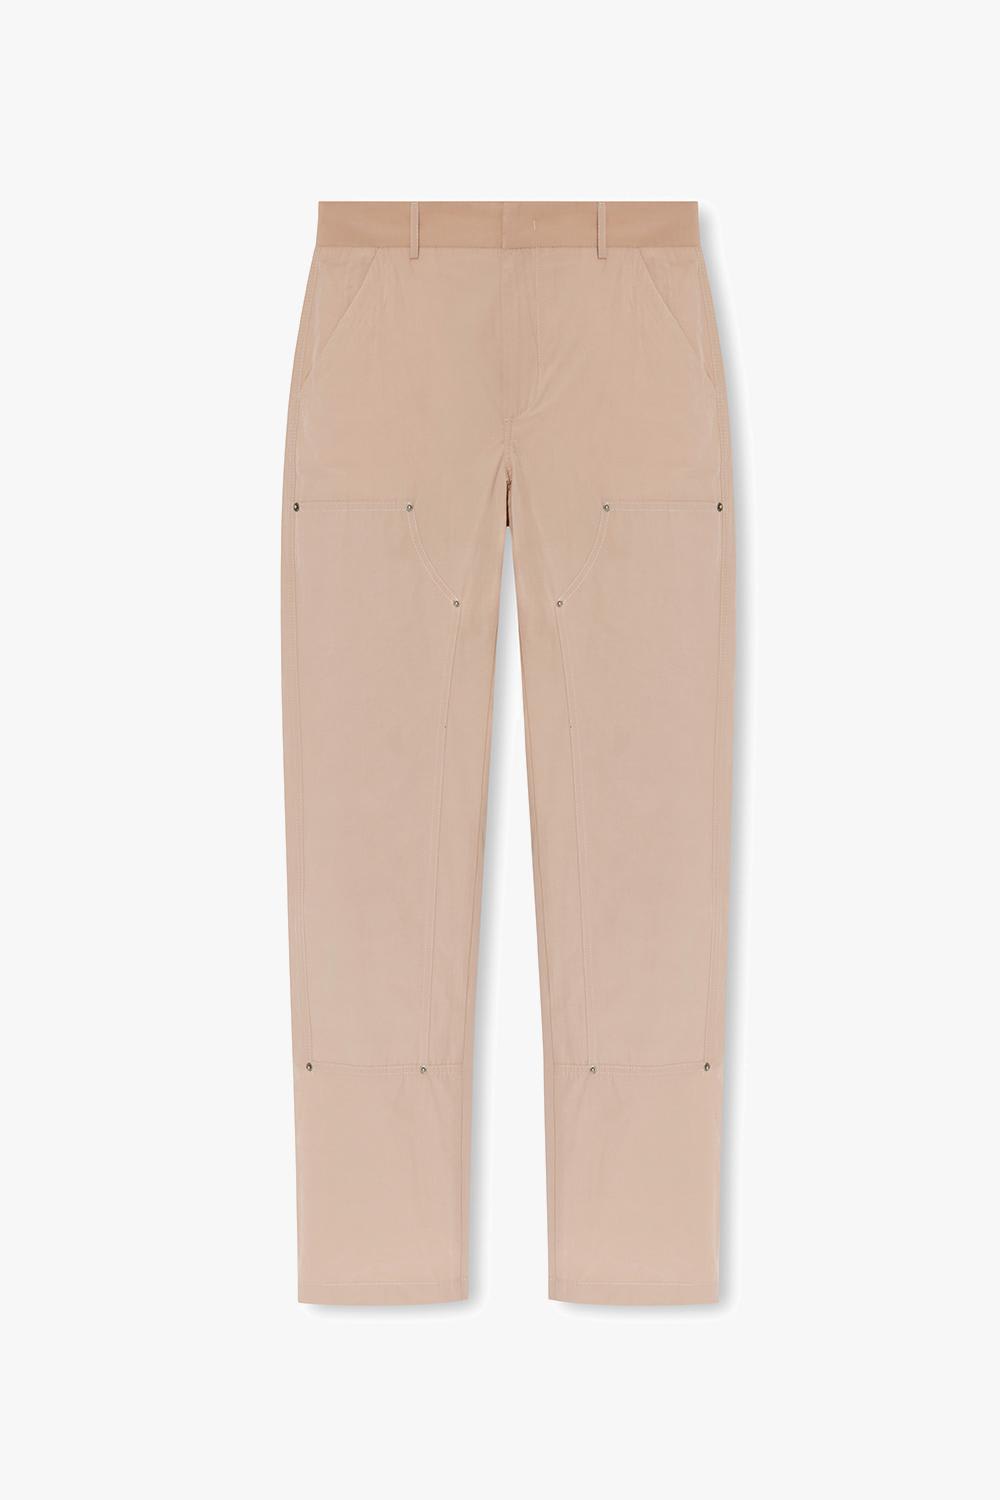 Fourtwofour On Fairfax Trousers With Pockets In Beige